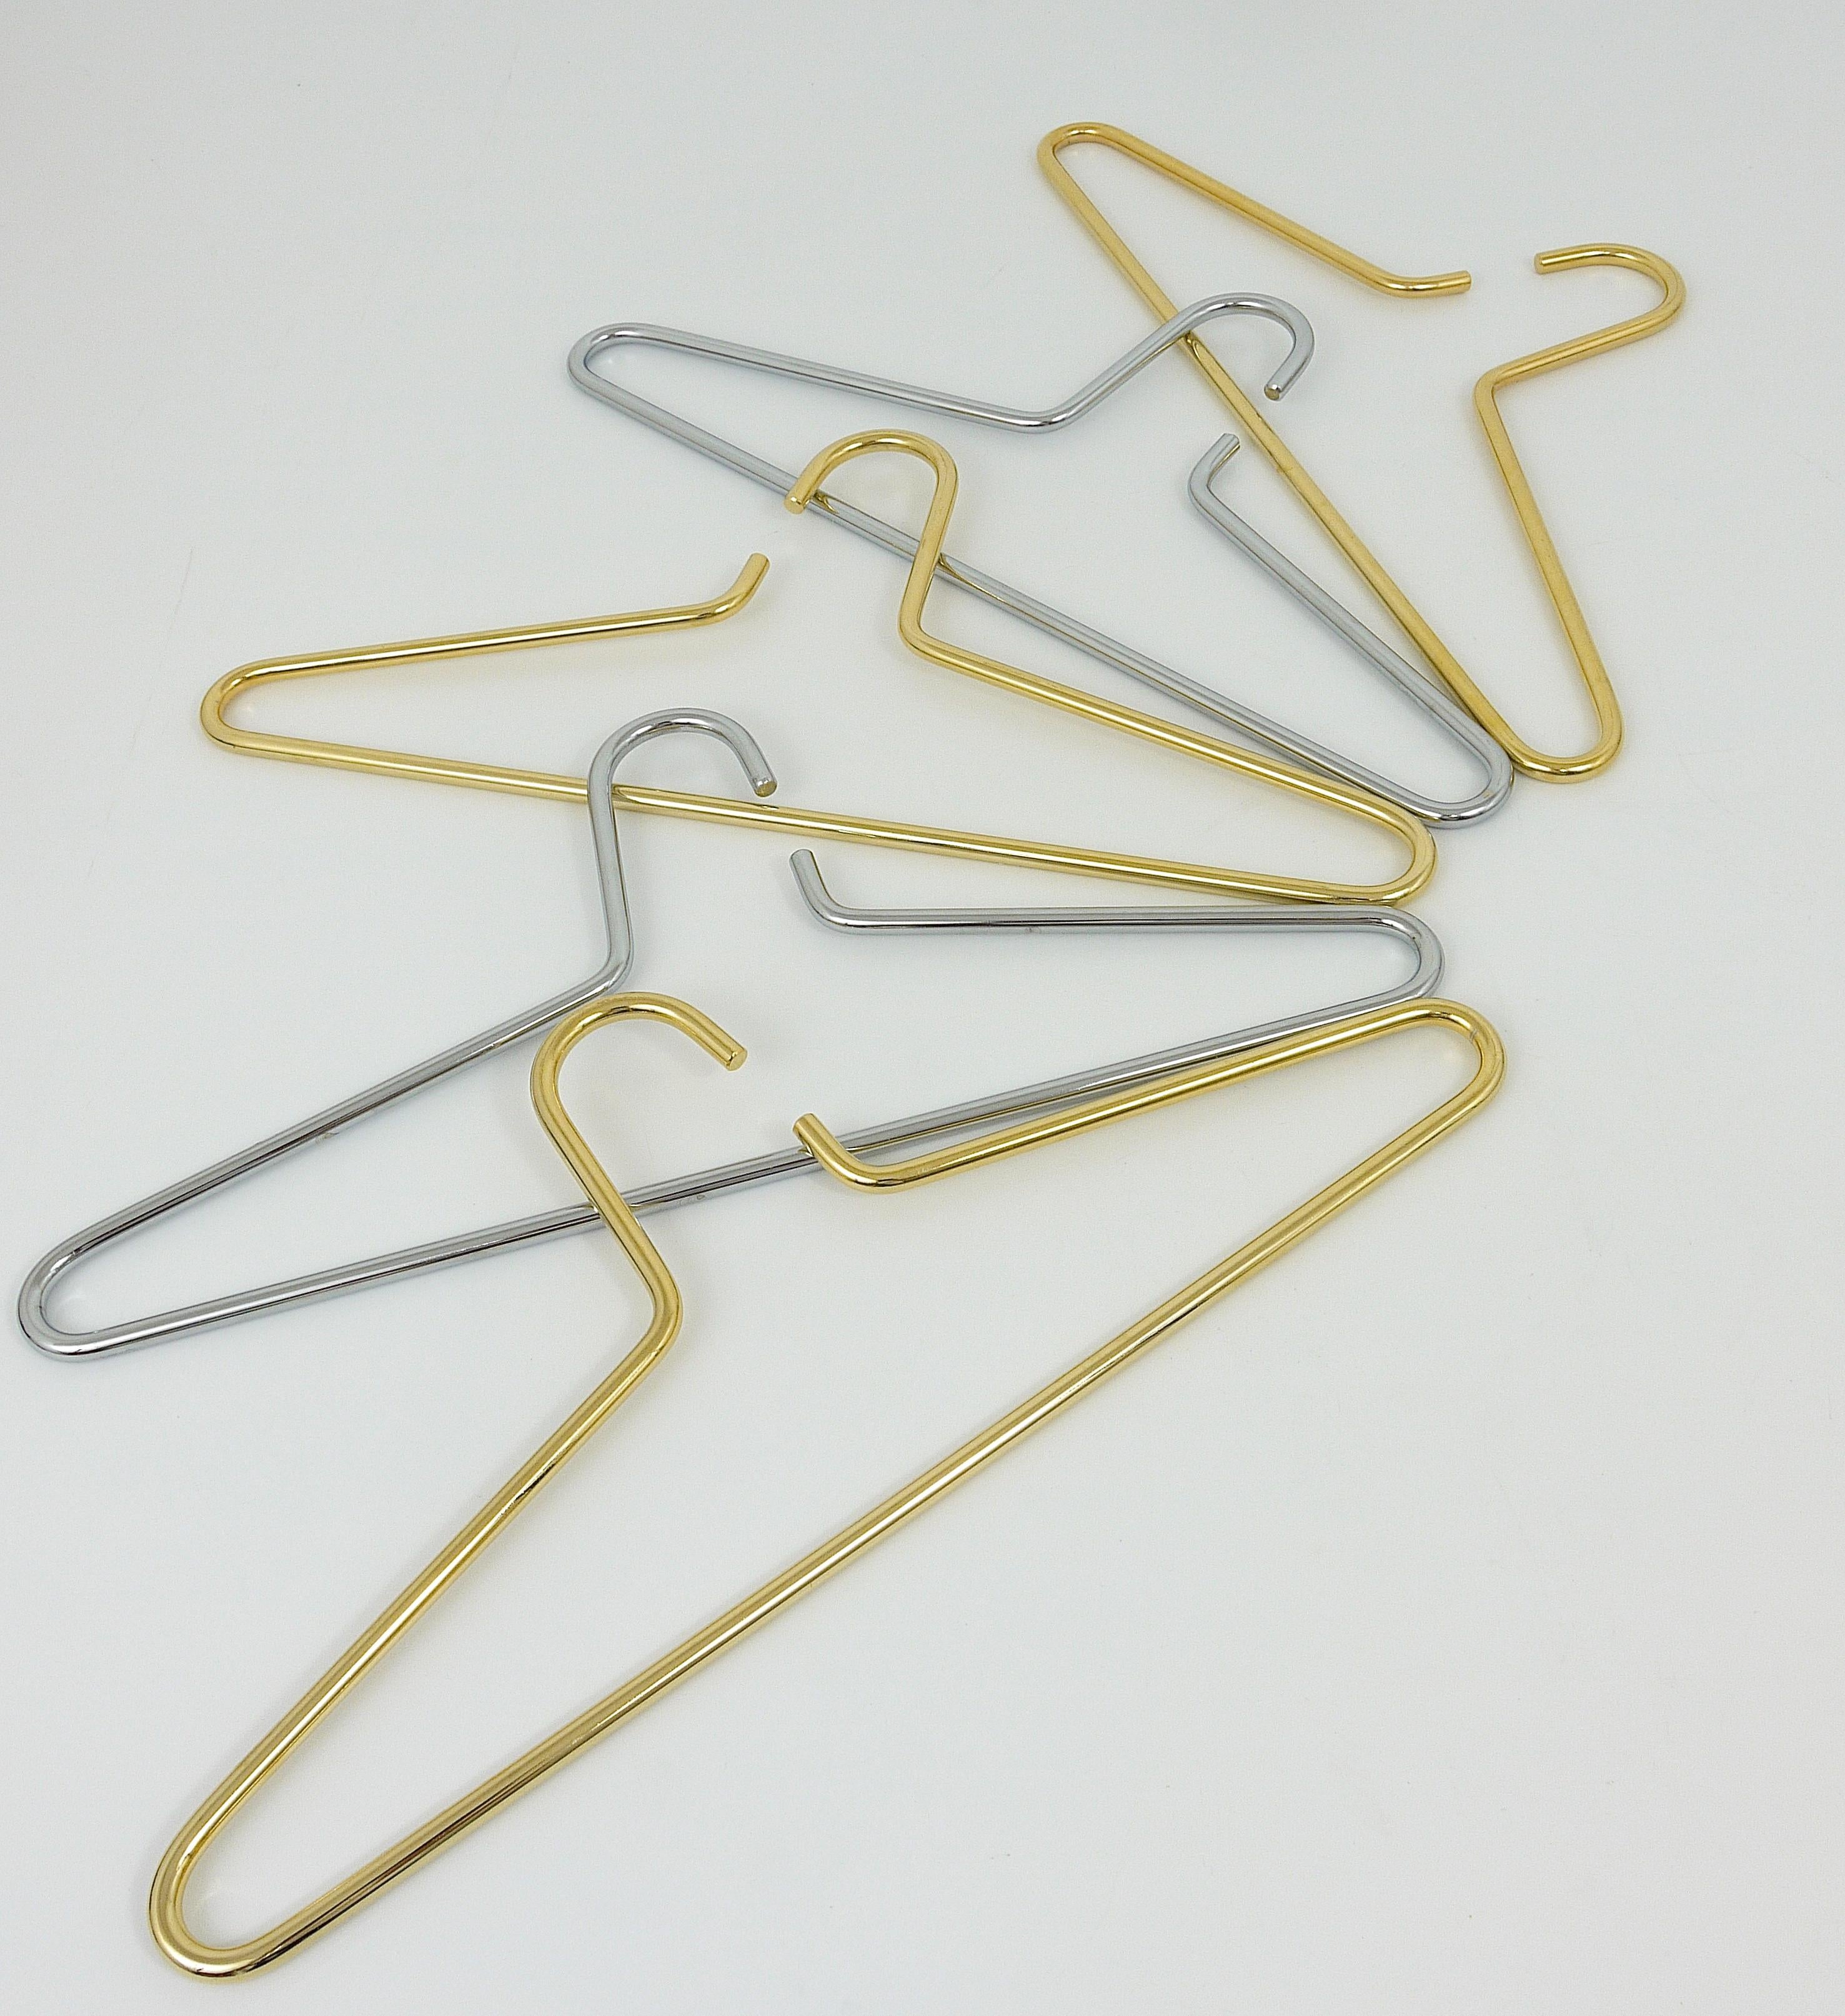 Mid-Century Modern Up to 12 Austrian Modernist Solid Gold-Plated Coat Hangers from the 1970s For Sale